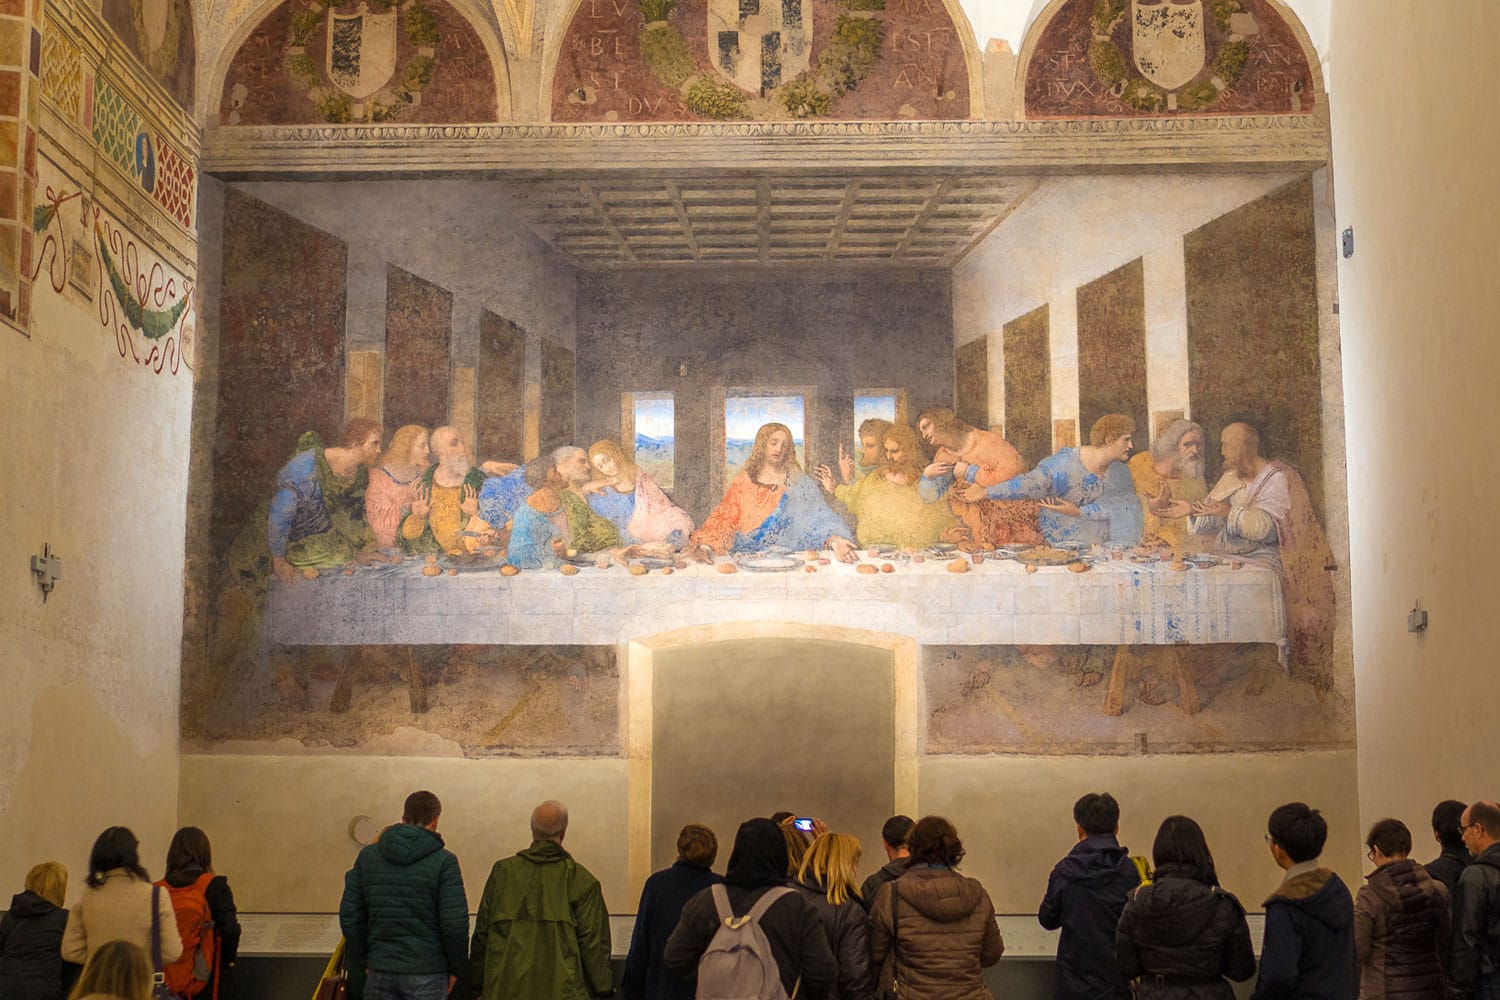 The Last Supper in the refectory of the Convent of Santa Maria delle Grazie in Milan, Italy